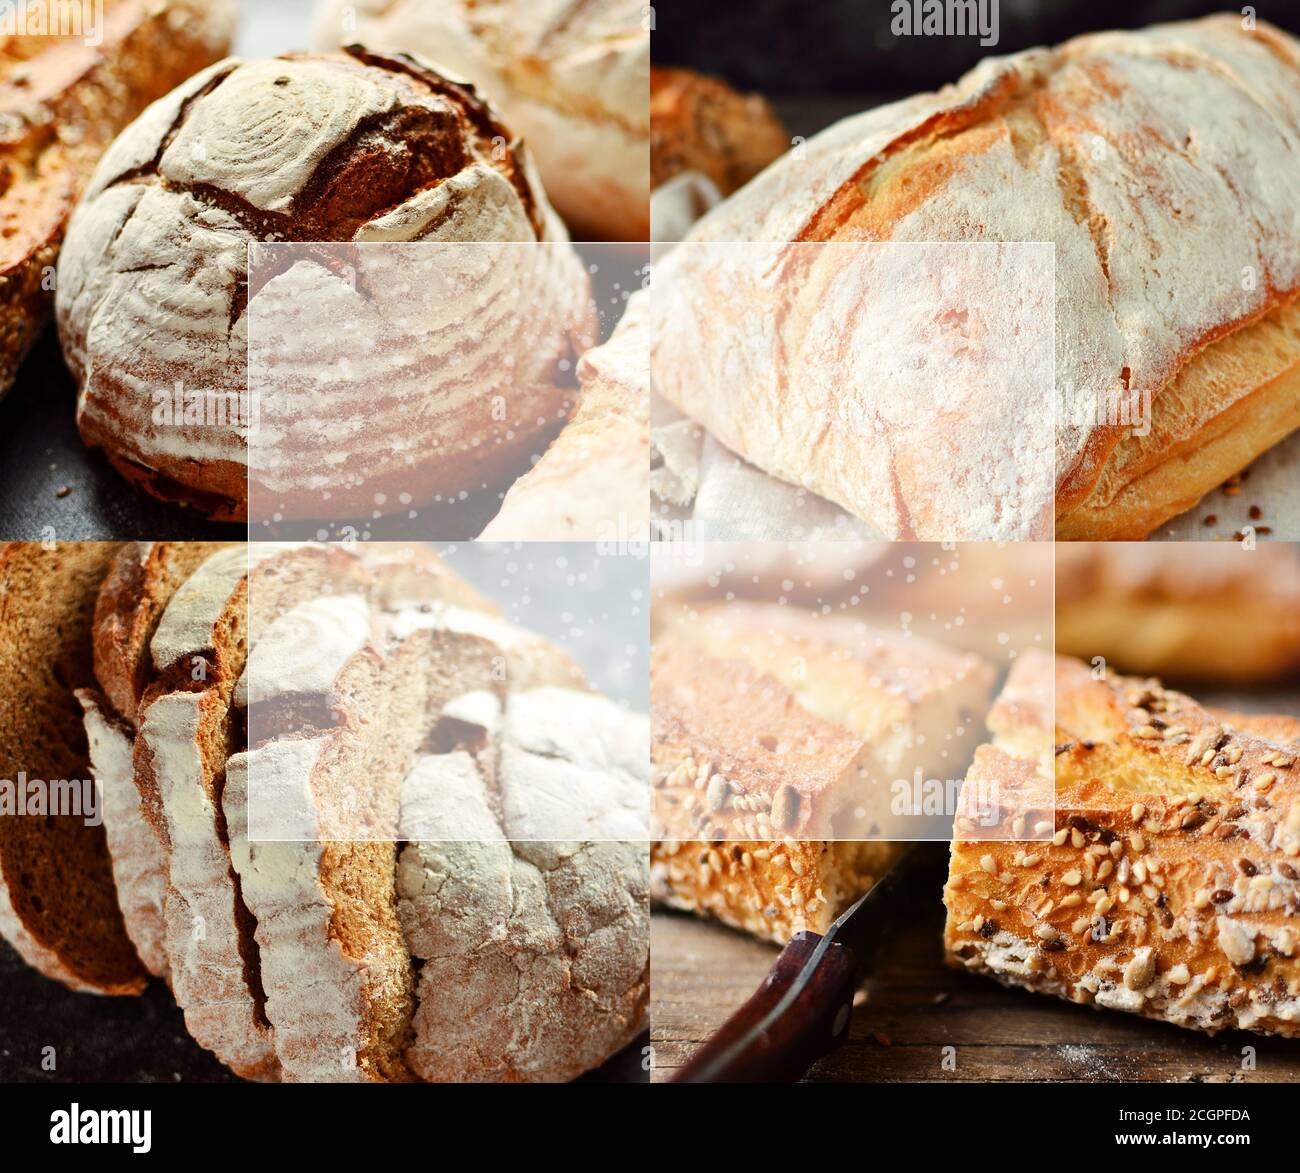 Assortment of bakery products. Wheat, buckwheat, yeast-free bread. Delicious and crispy bread. Food collage. Free space for text Stock Photo